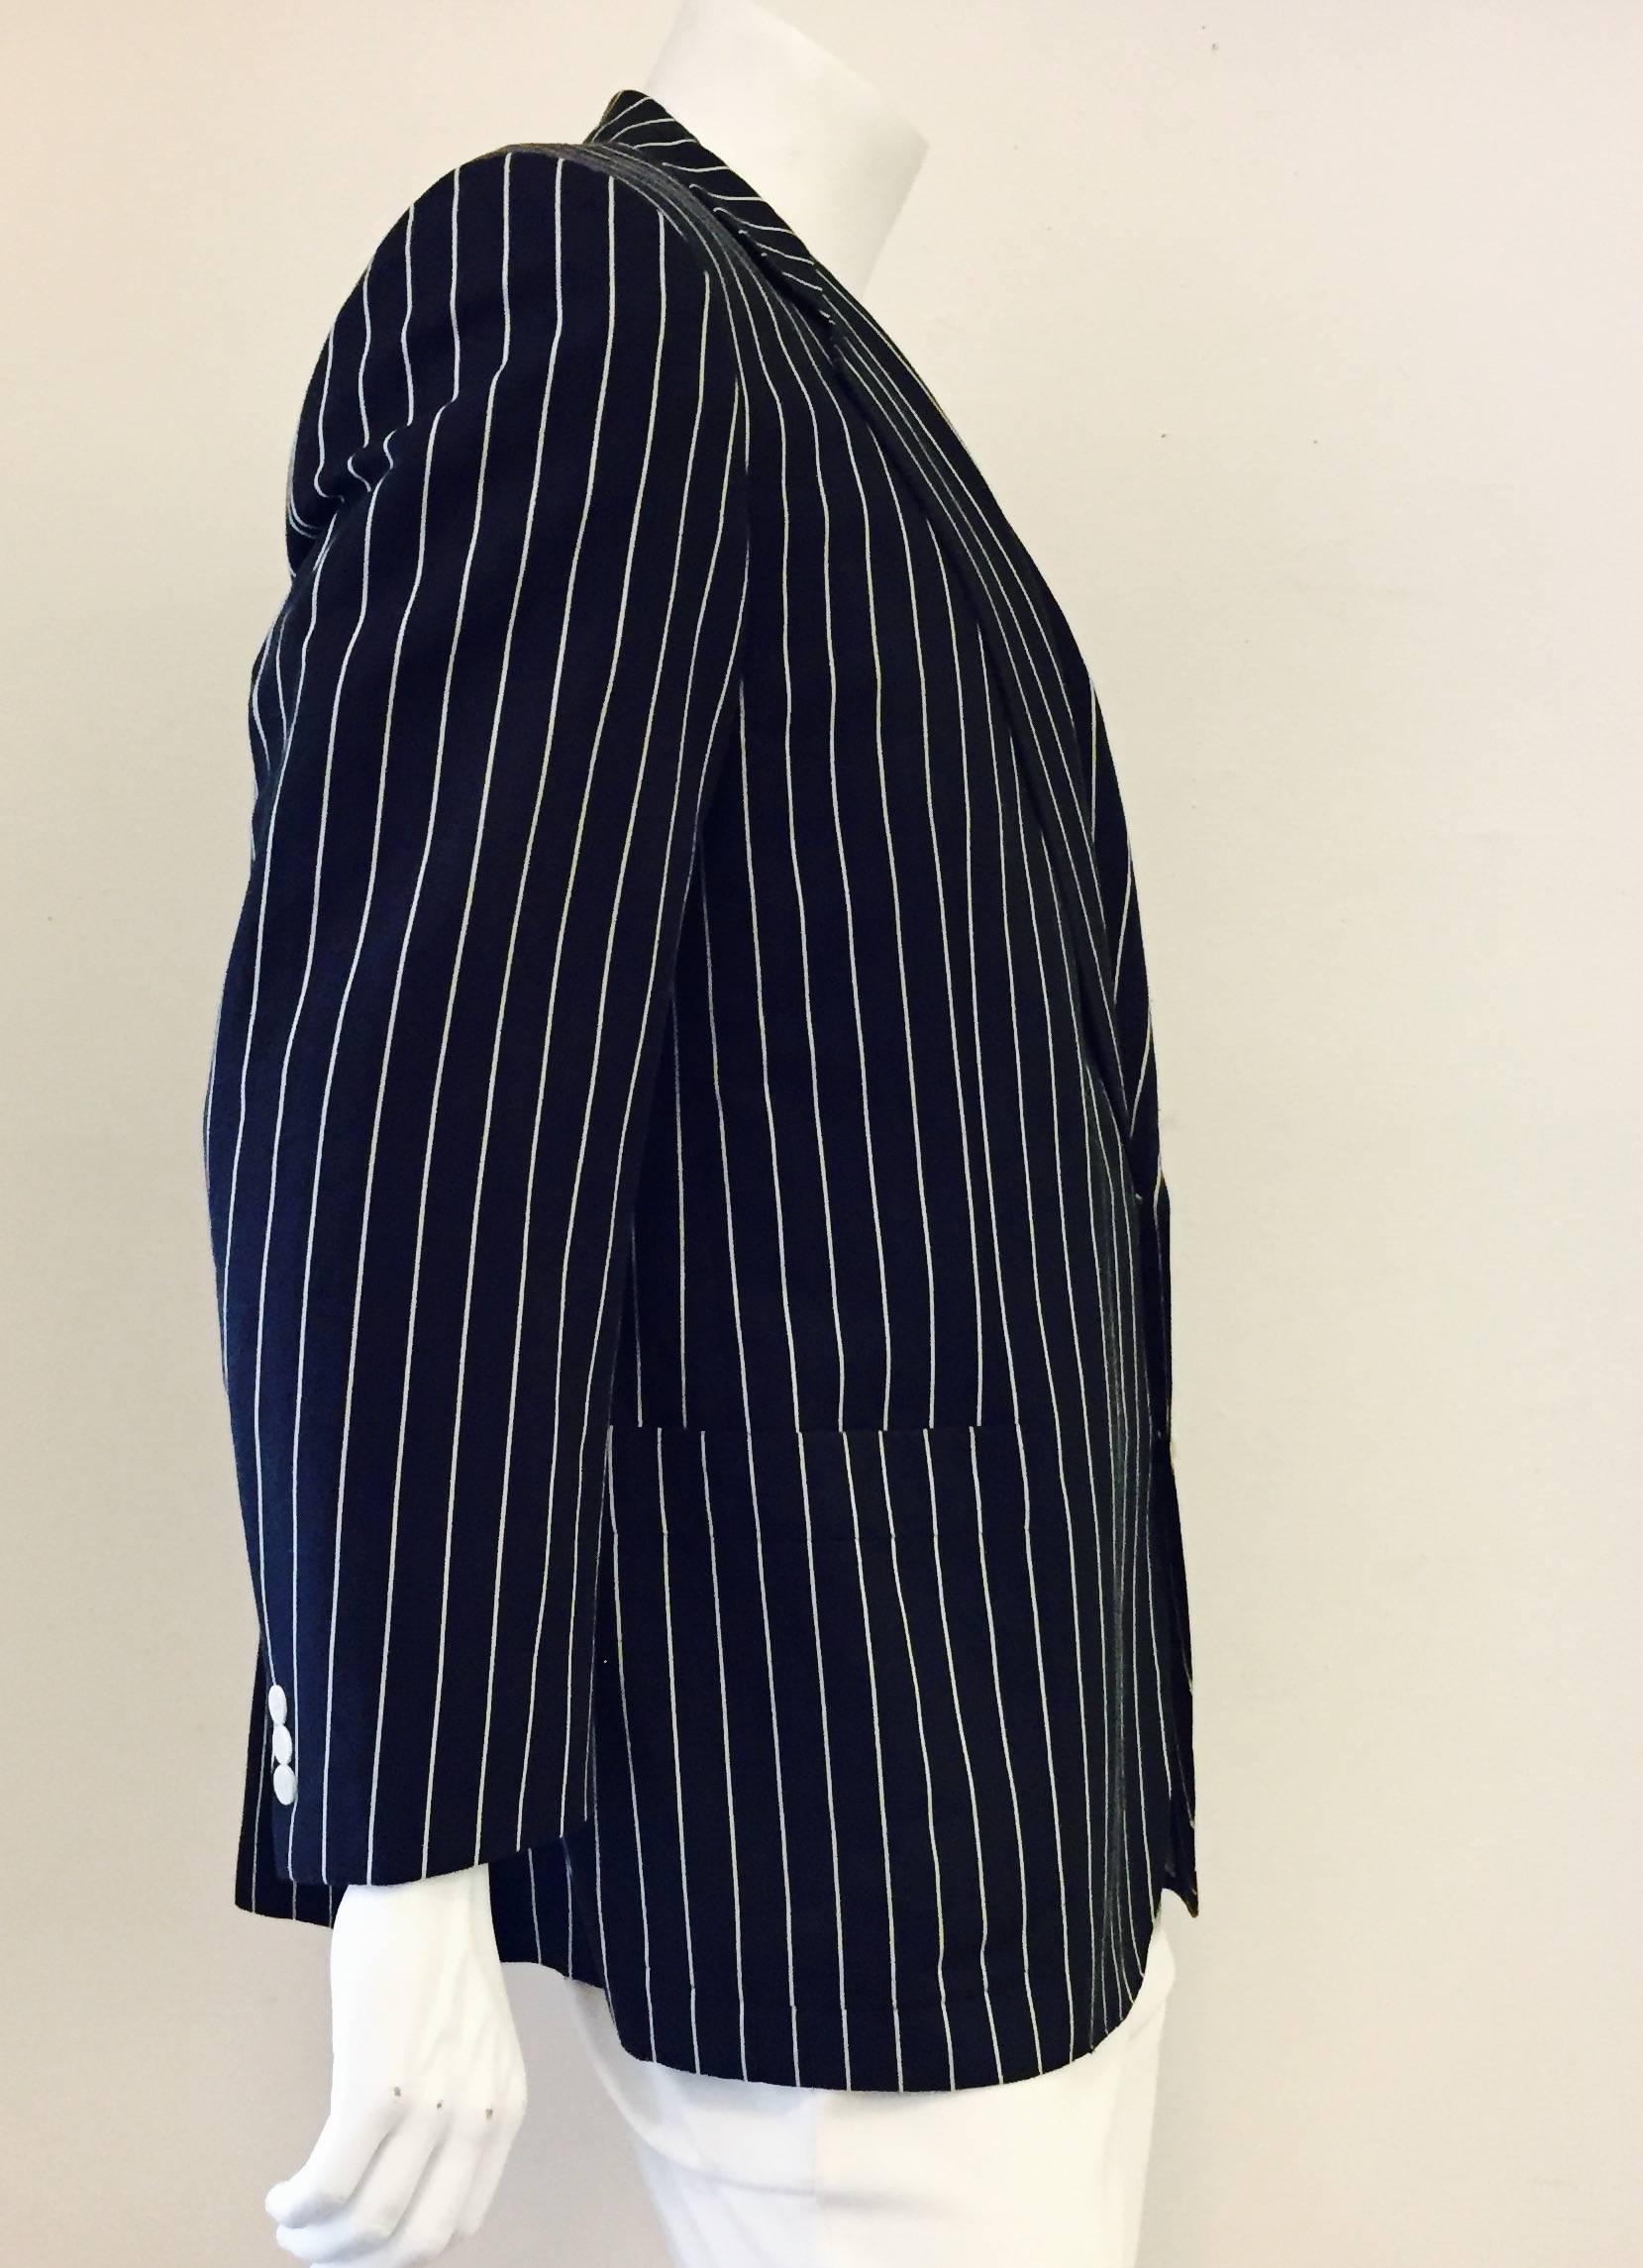 Men's classic Brioni for Maus and Hoffman of Palm Beach.  This vintage 1980's cotton and linen jacket is worthy of a naval officer!   Chest measures 46 inches, back seam 30.5 inches, sleeve 24.5 inches. Single rear vent, two patch and one slit